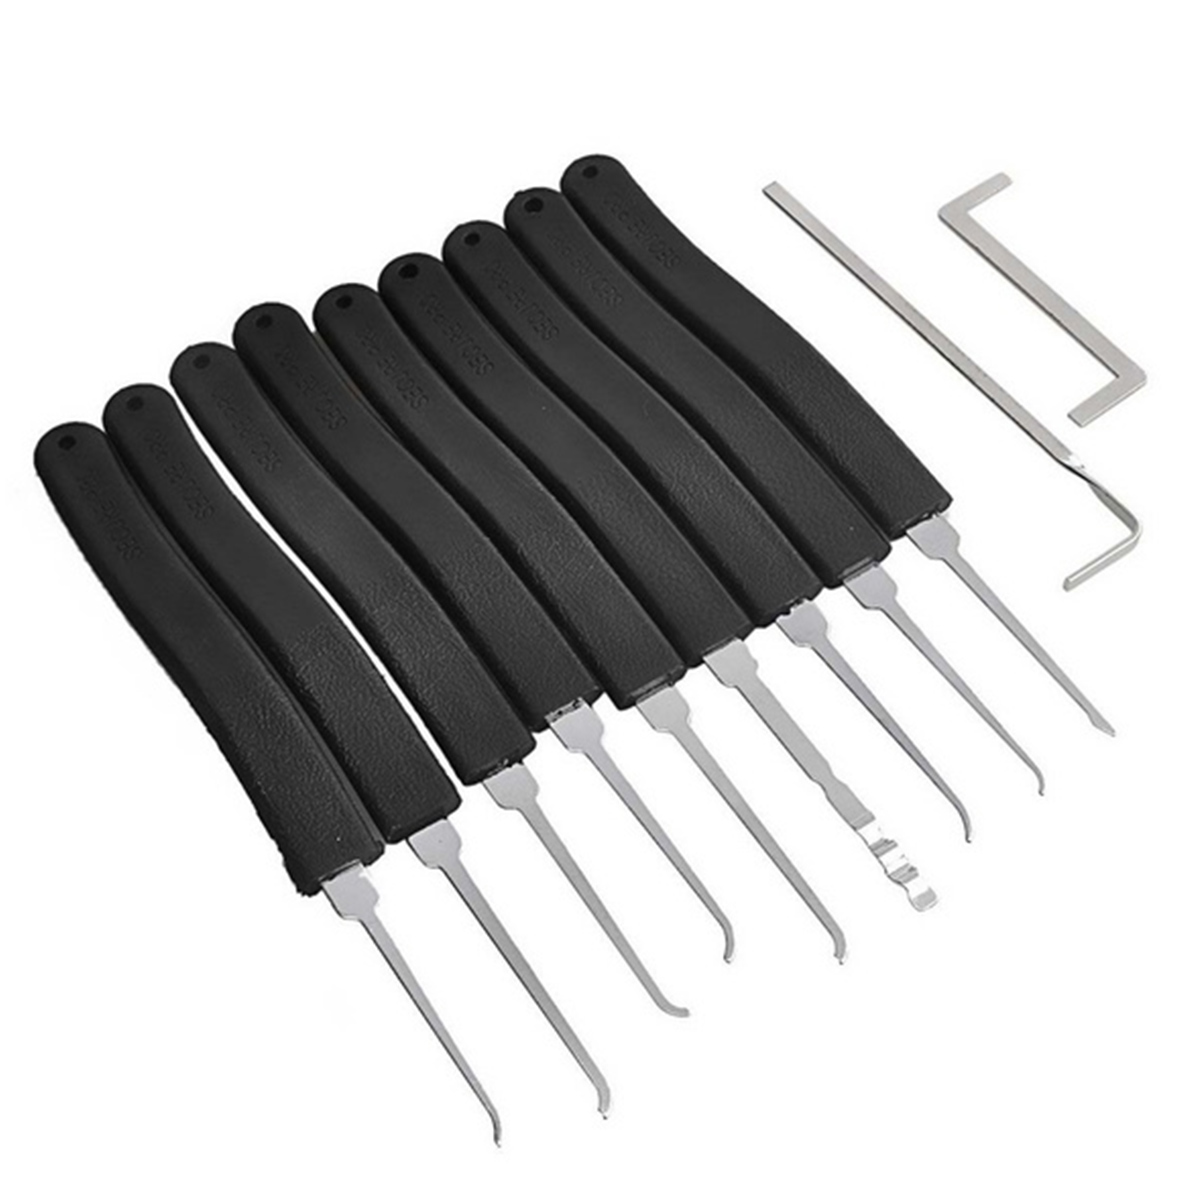 Find Padlock Pick Set For Locksmith Training 38/24/17/15/11/5pcs Lock Pick Practice Tools Hooks Set for Sale on Gipsybee.com with cryptocurrencies